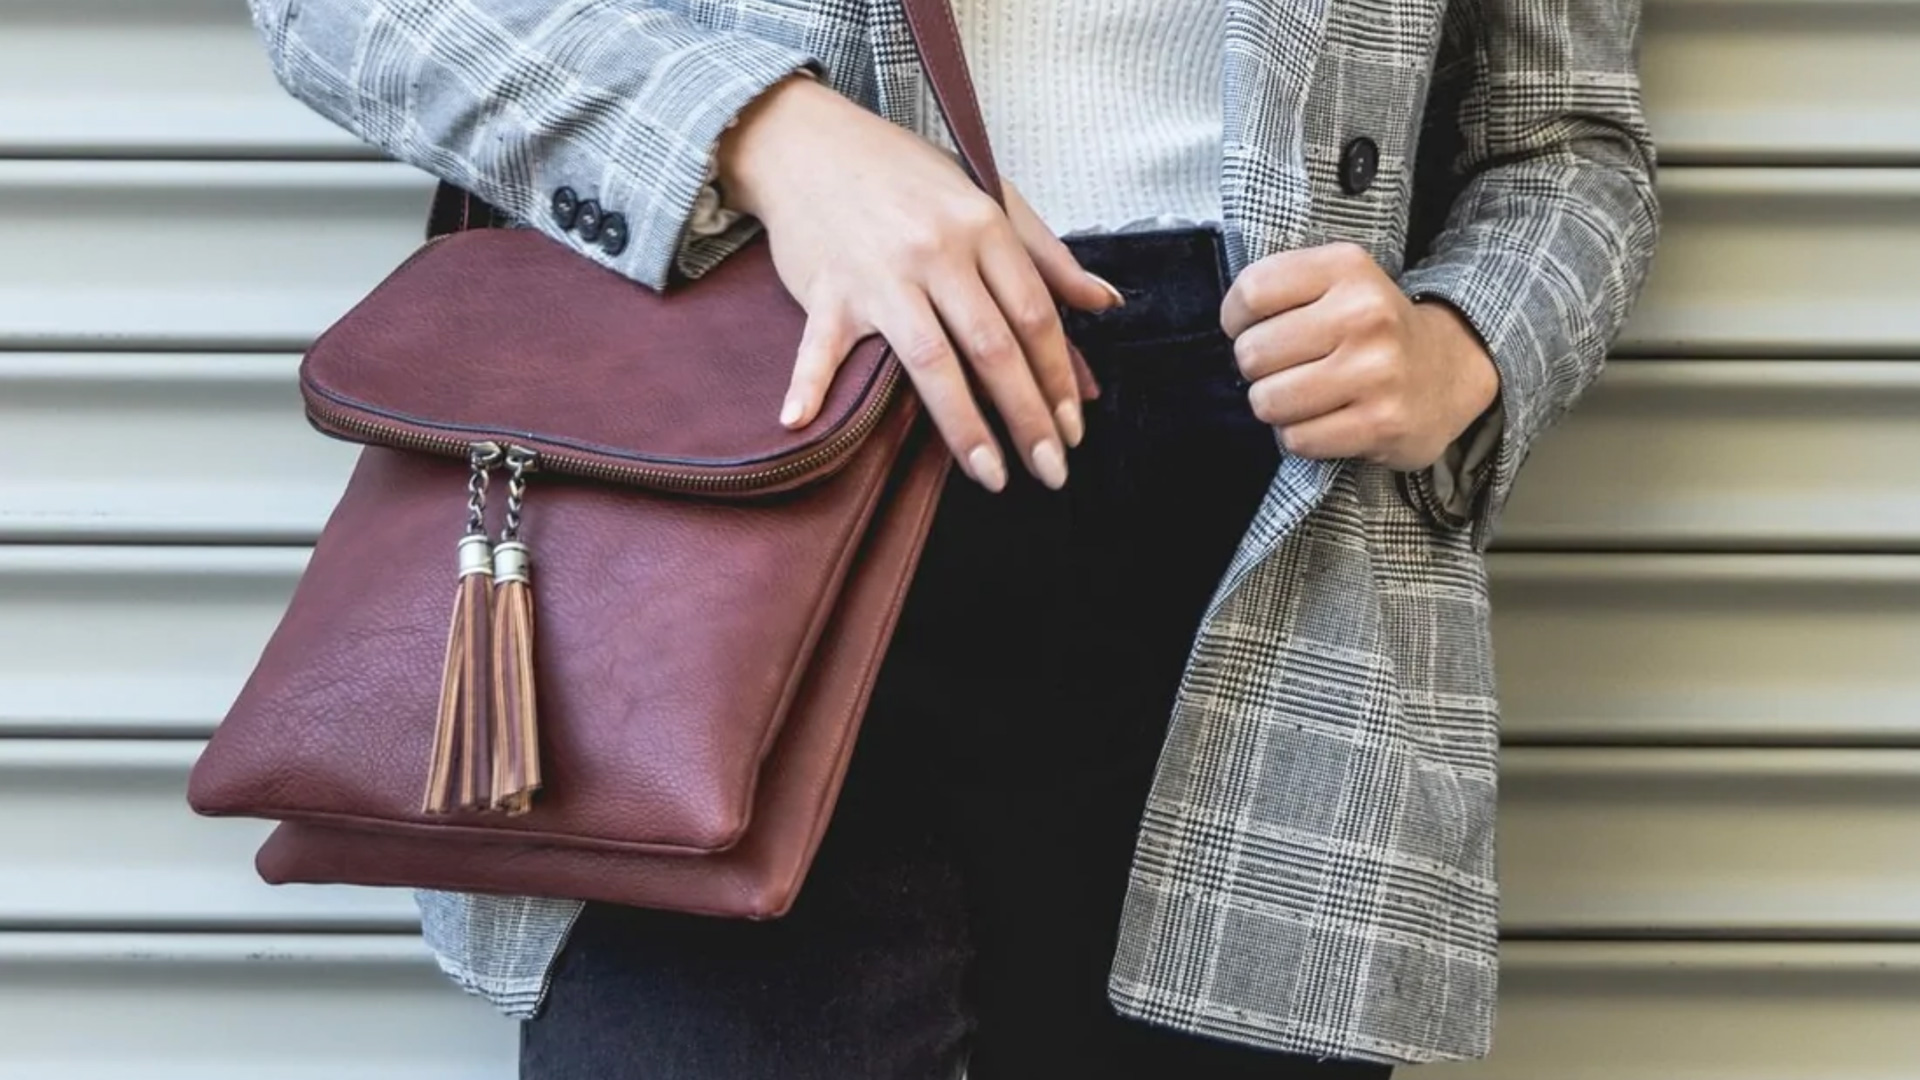 Concealed Carry Purses Are the New Hermès Birkins